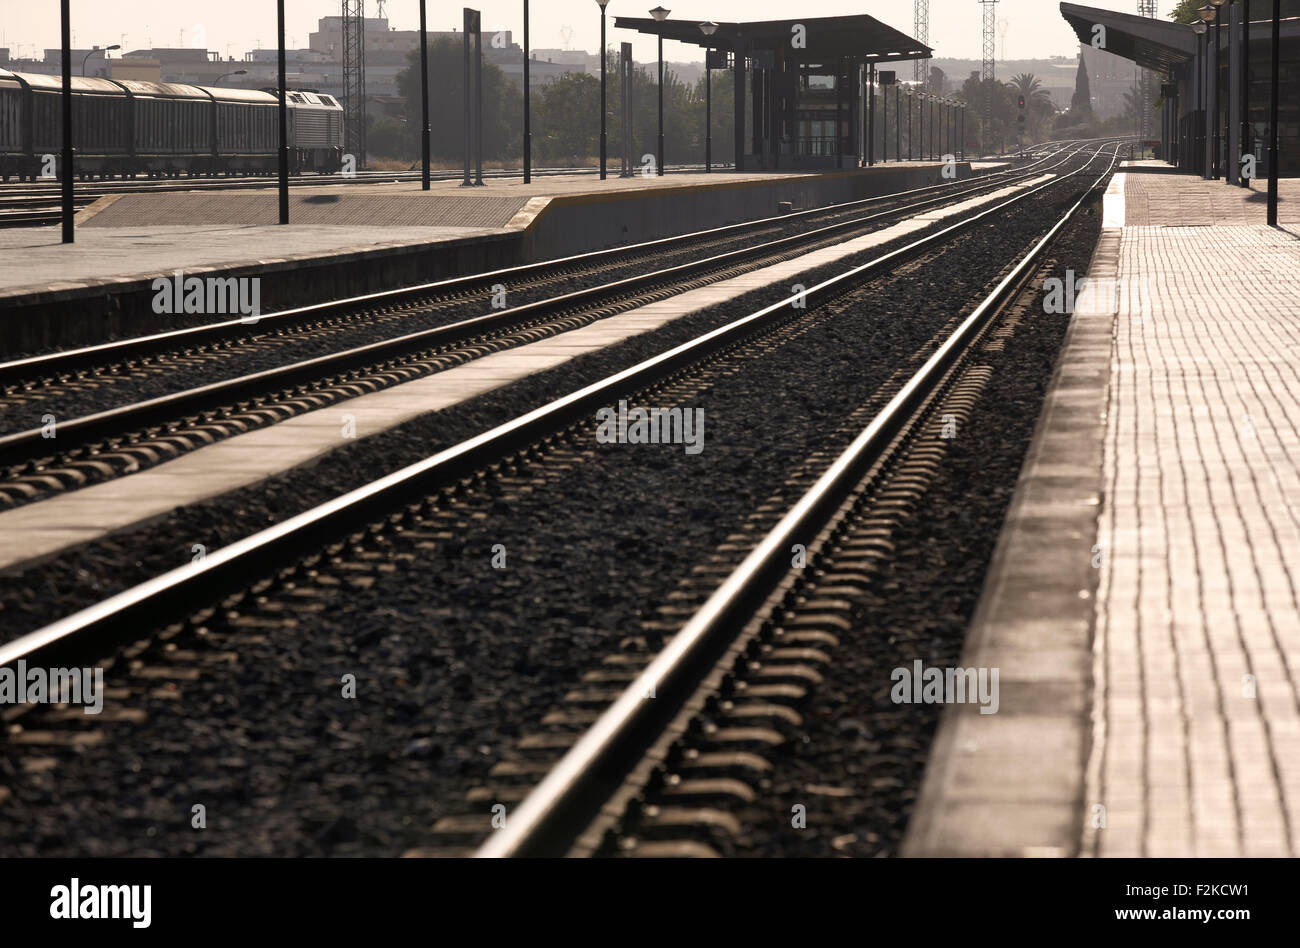 Railway station platforms and rails at sunset Stock Photo